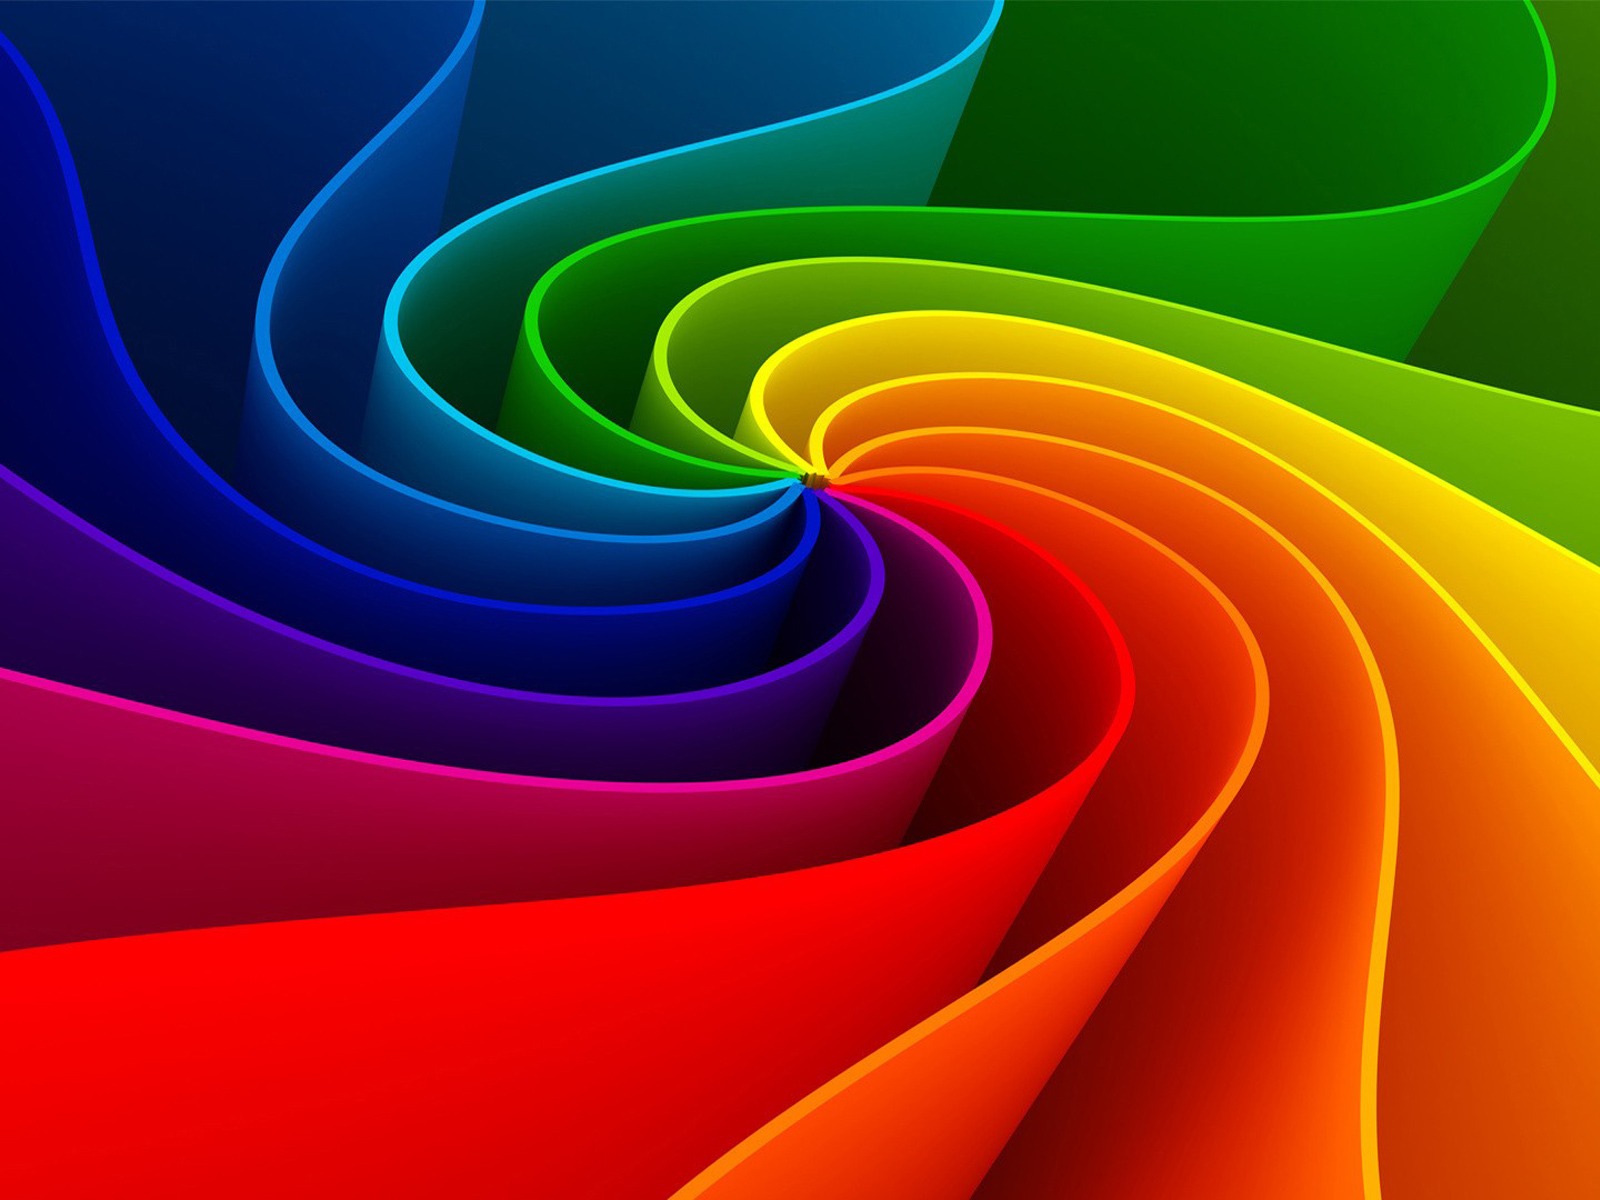 Rainbow 3d Background Image For Your